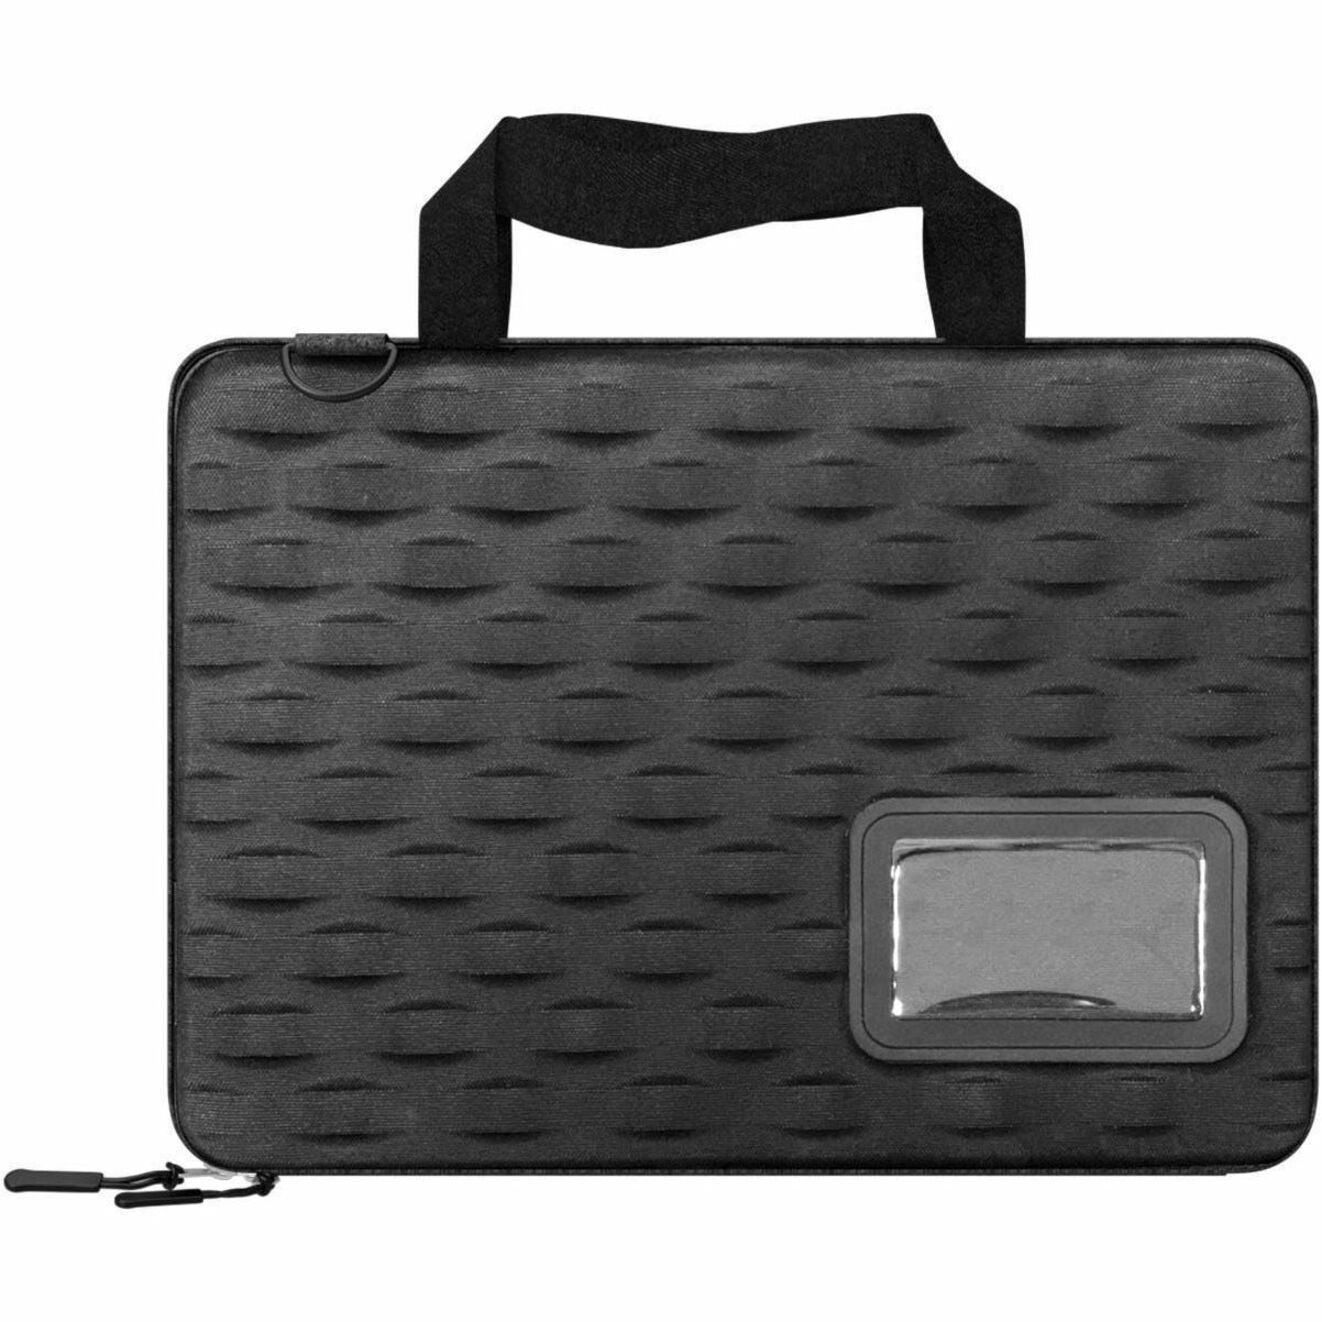 MAXCases MC-EB4P-11-BLK Explorer 4 Work-In Case w/Pocket 11 (Black), Compatible with MacBook Air, MacBook Pro (2018), Durable and Protective Carrying Case